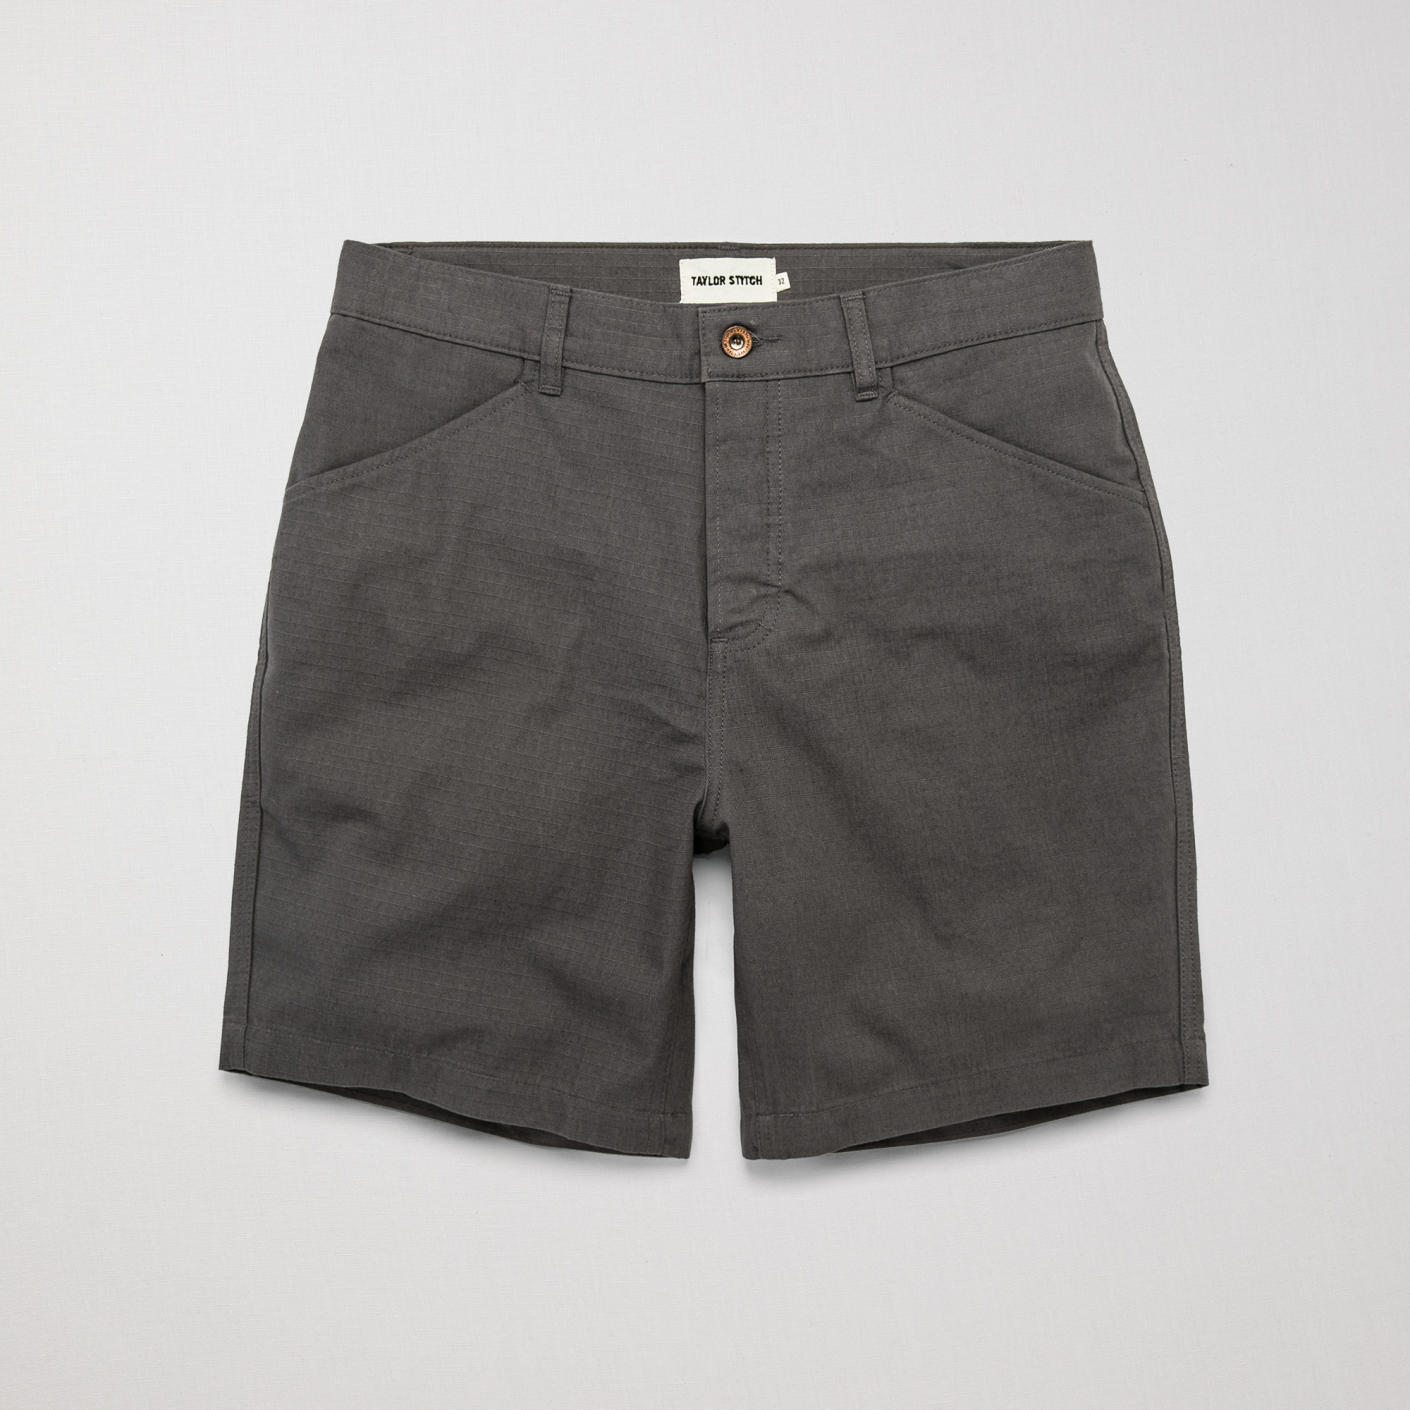 Taylor Stitch, The Camp Short, Gravel Ripstop